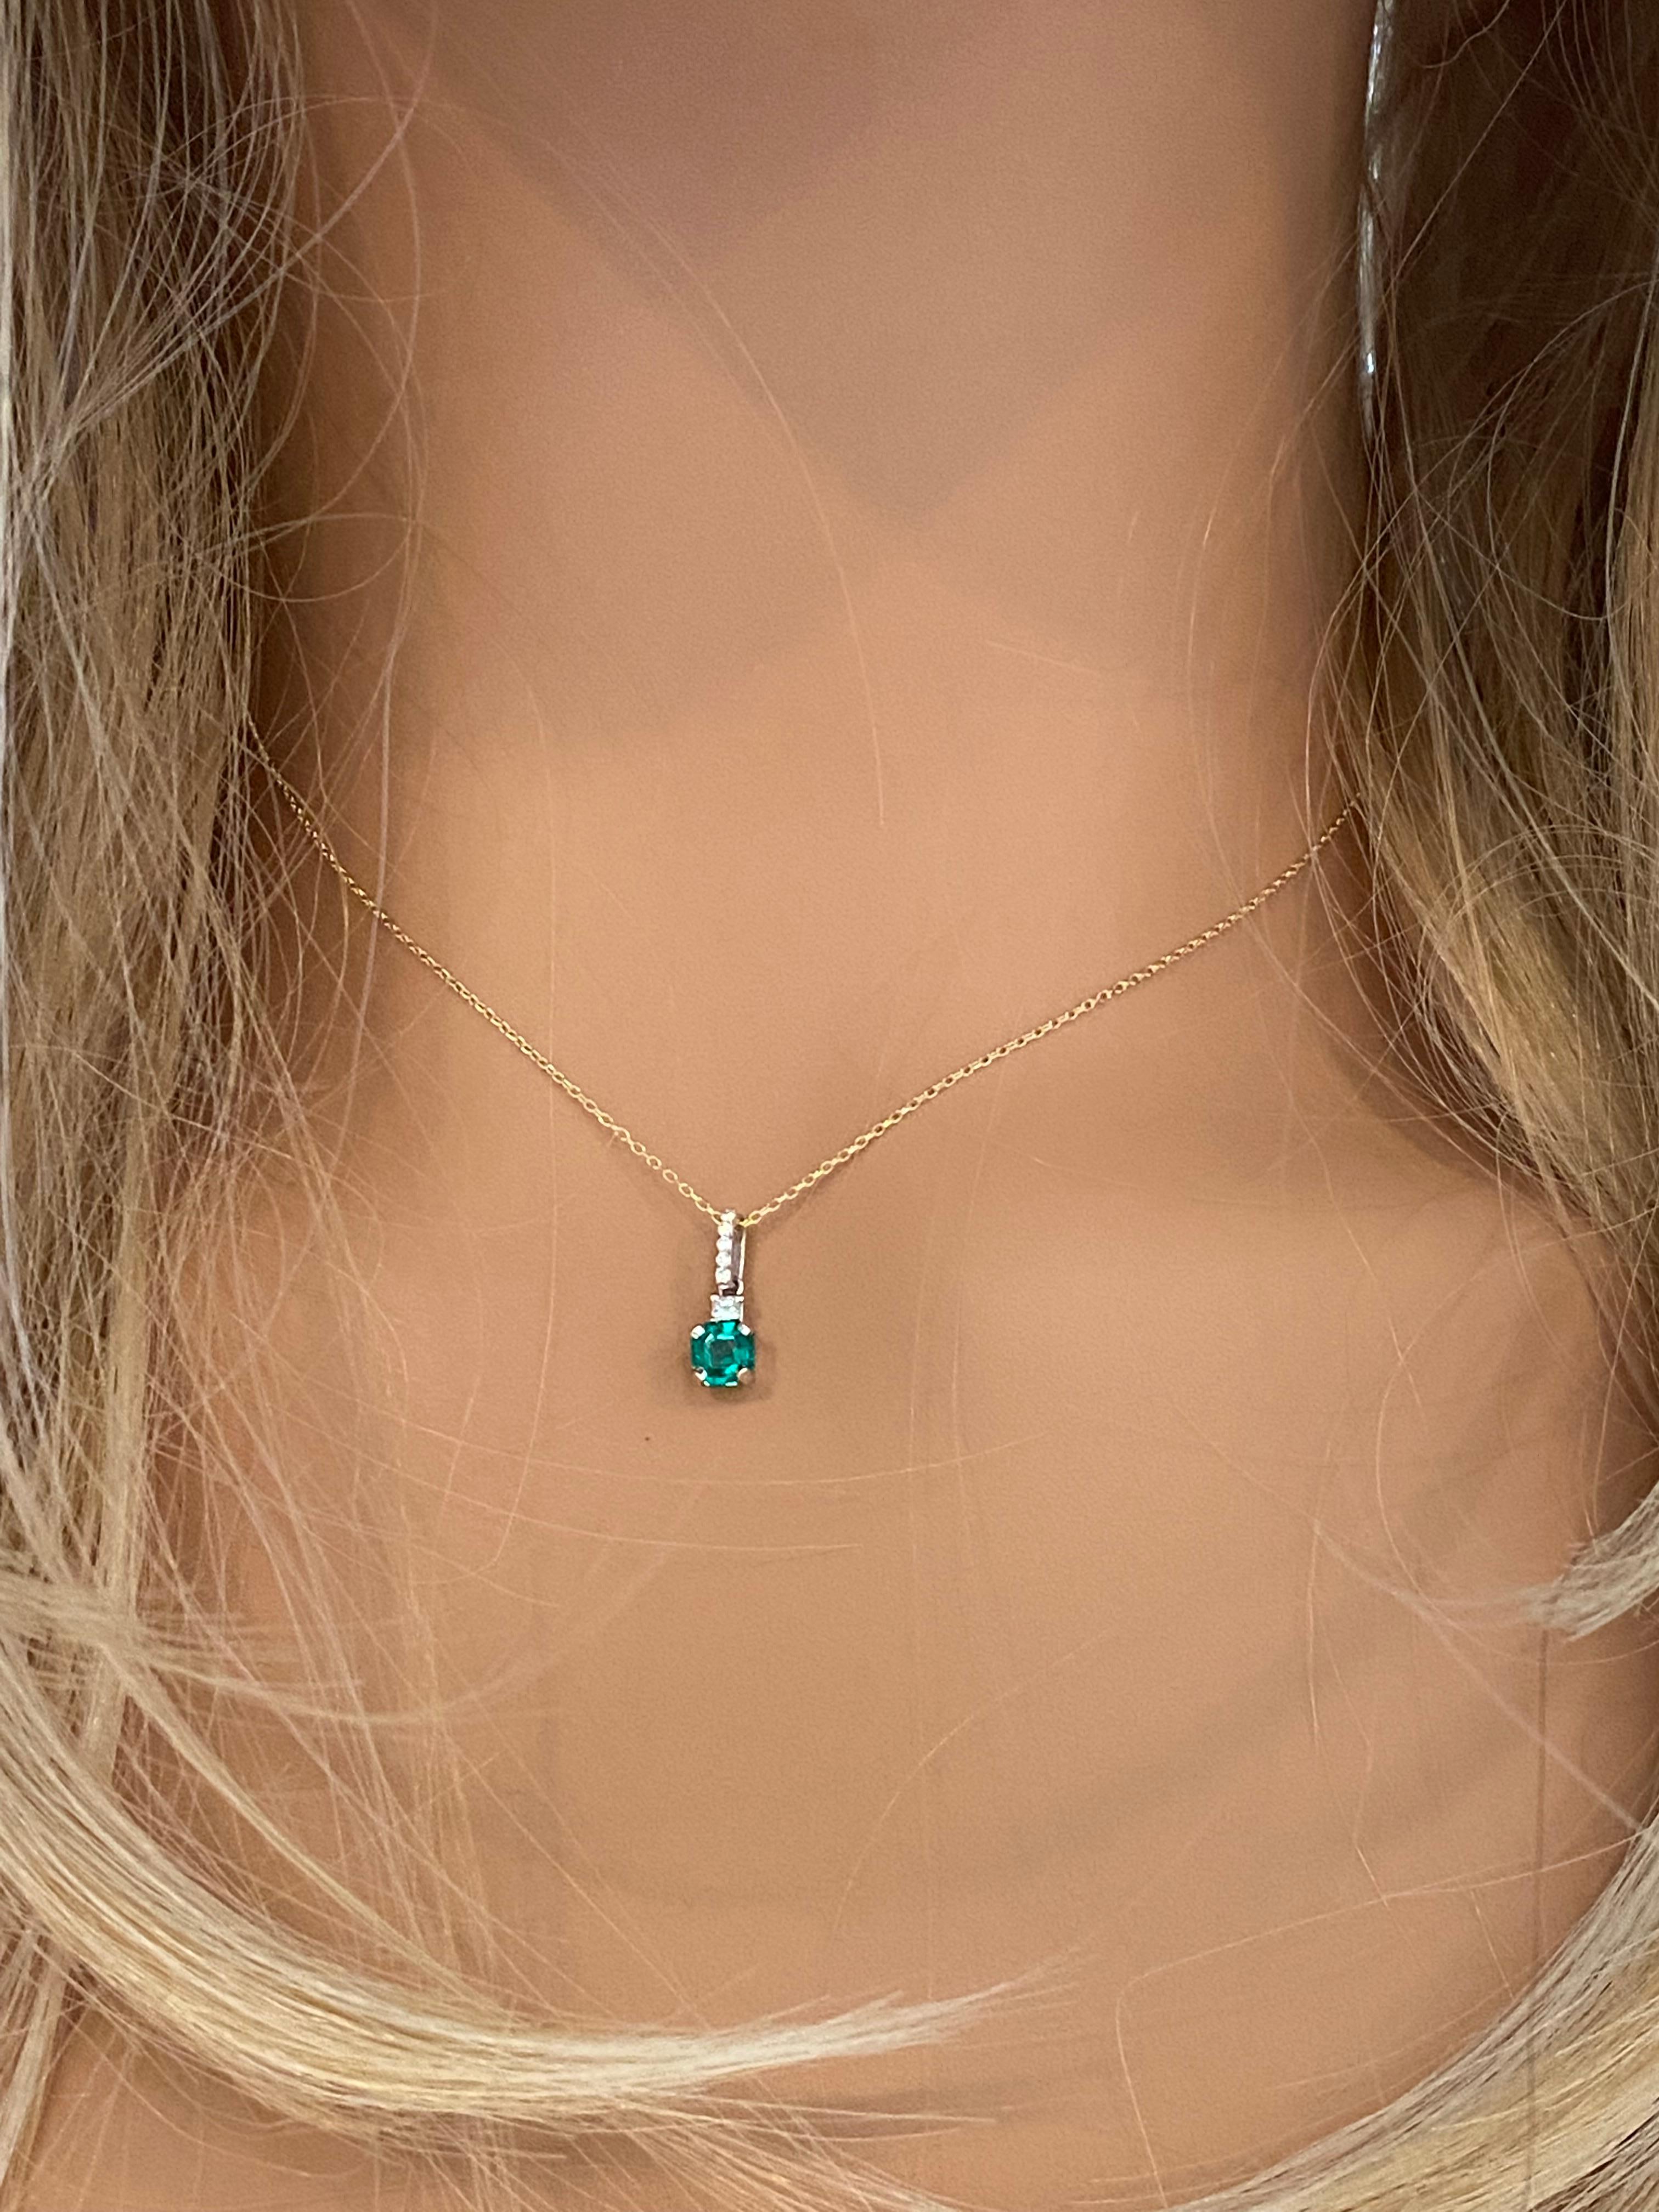 14 karats white and yellow gold necklace pendant with emerald-shaped emerald
Necklace measuring 16 inches long
Colombia emerald-cut emerald  weighing 0.60 carats
One princess cut diamond weighing 0.10 carats
Diamond bail weighing 0.09 carats
Emerald